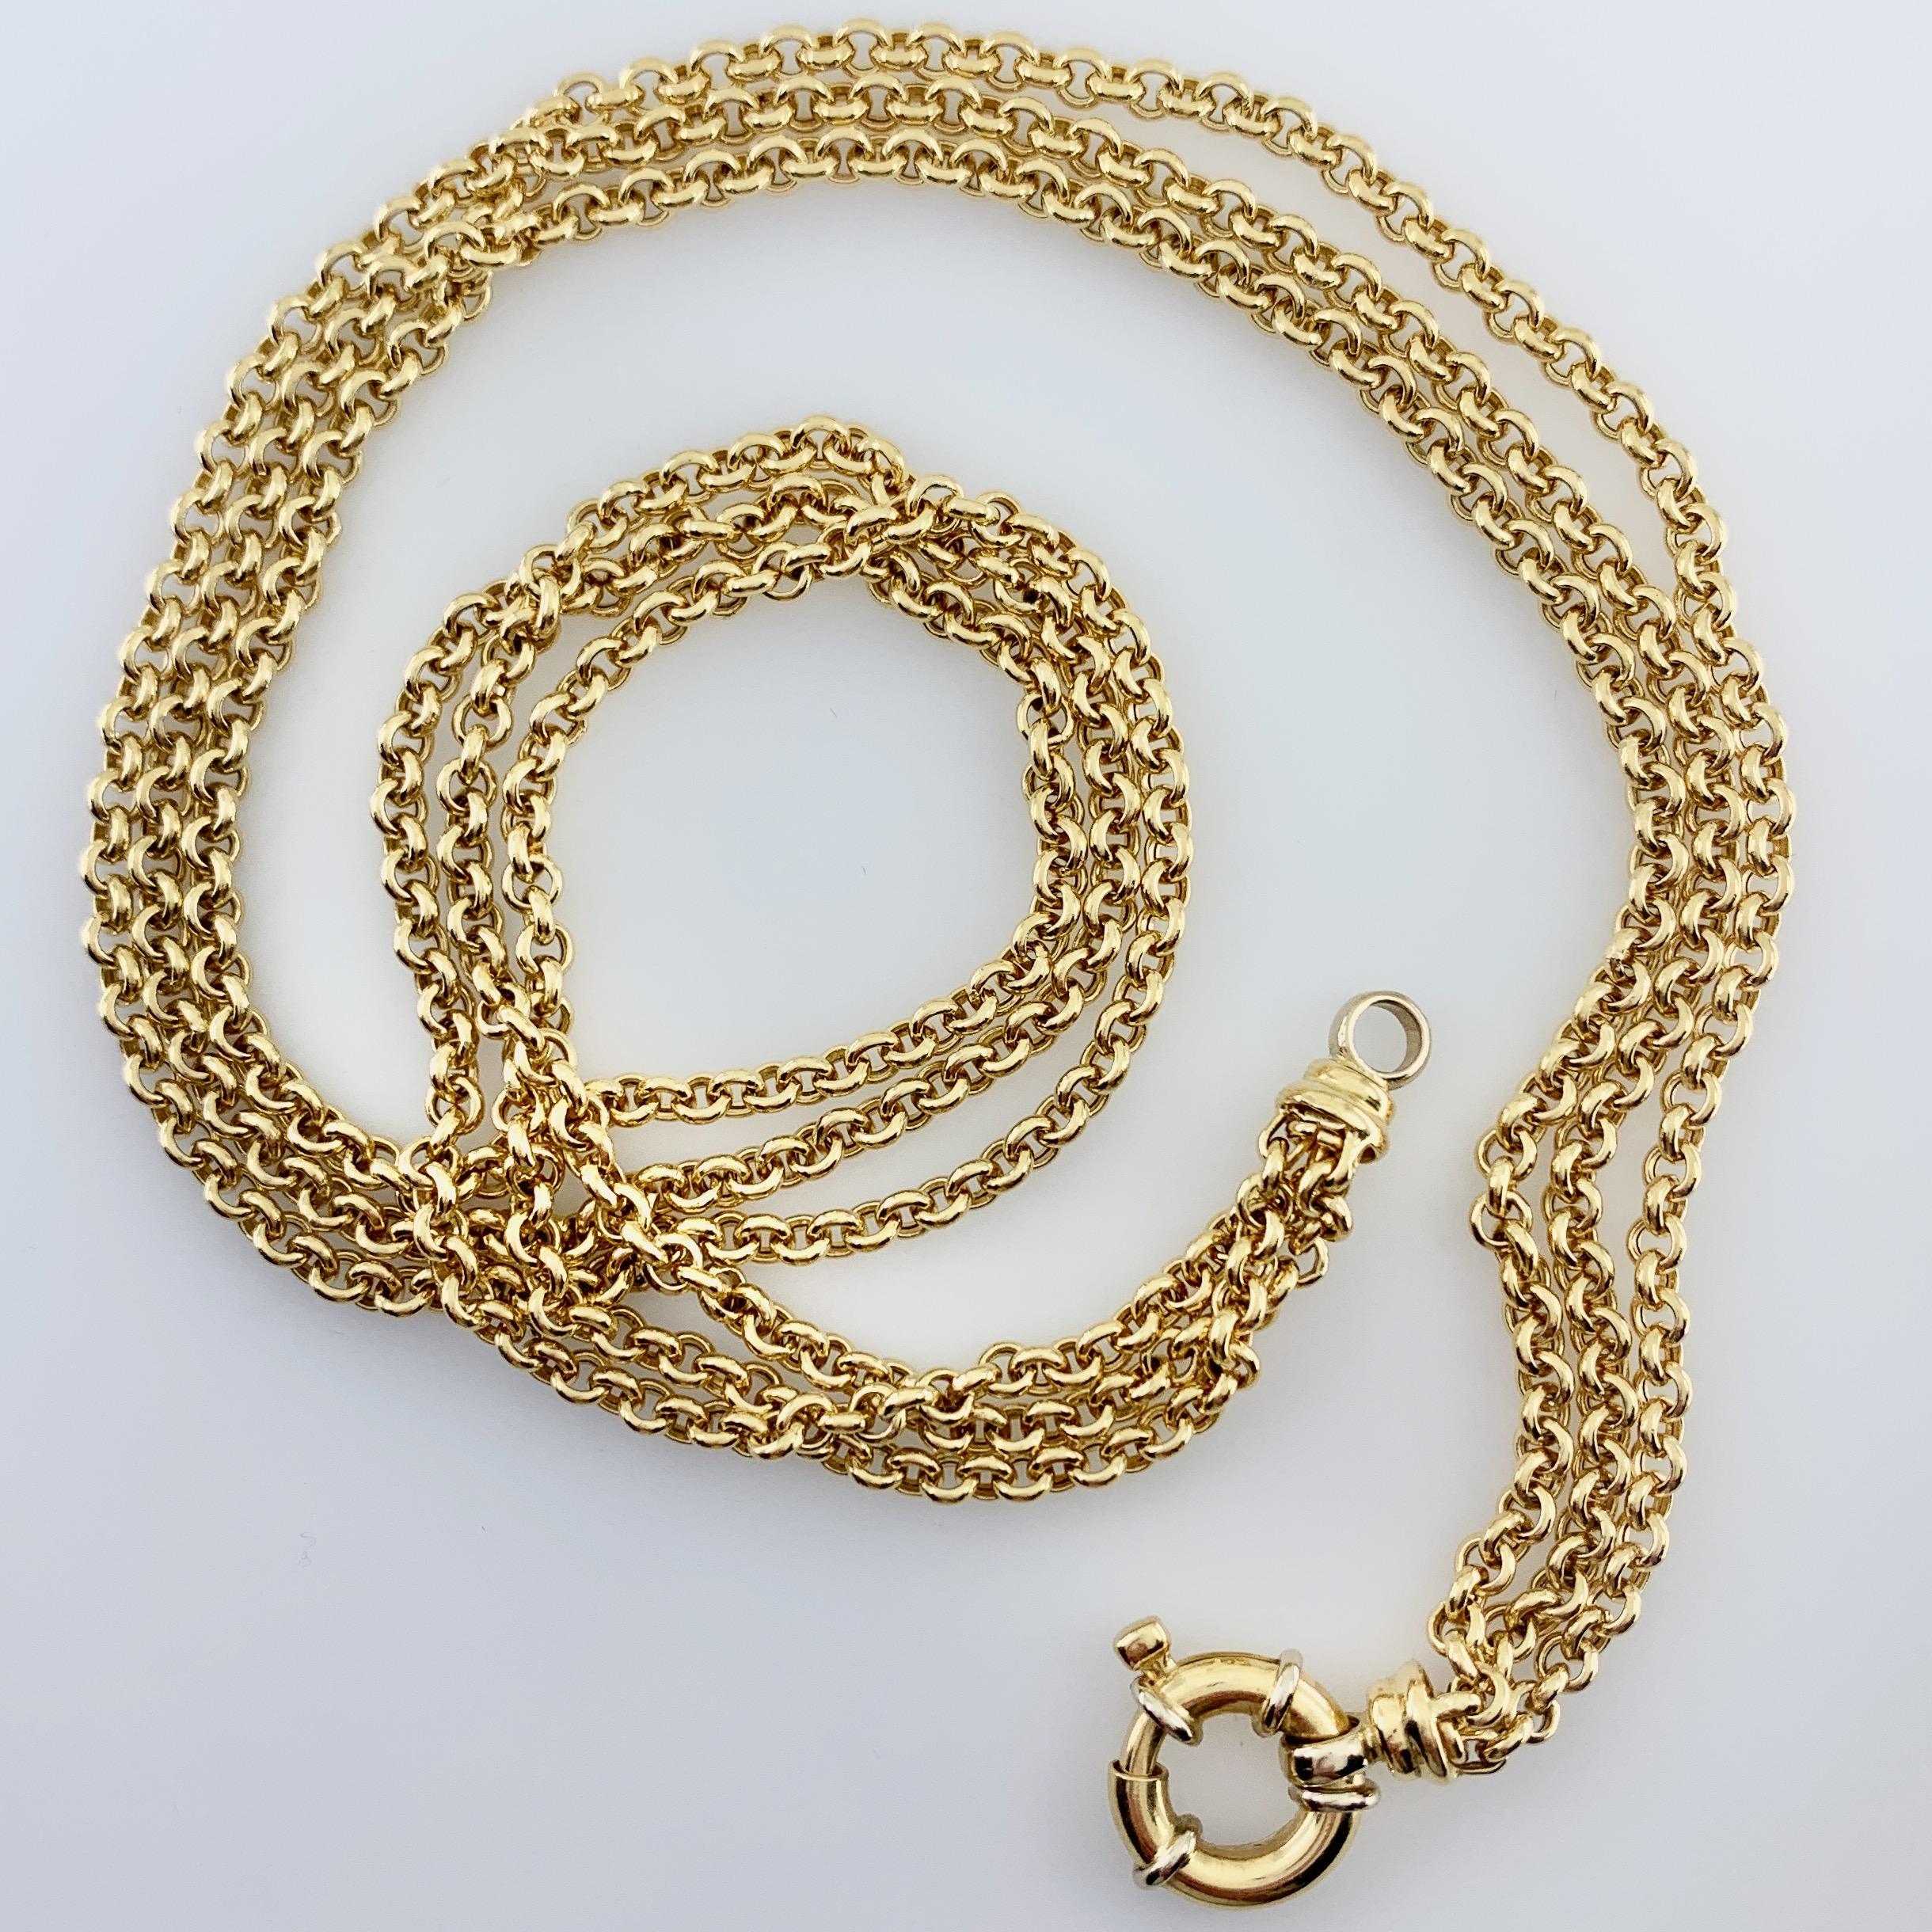 This great-looking workhorse has rounded rolo (aka belcher) links reminiscent of antique watch chains.  The three strands are equal in length and terminate with a chunky bolt ring closure that looks good enough to wear in the front.  It's a bit